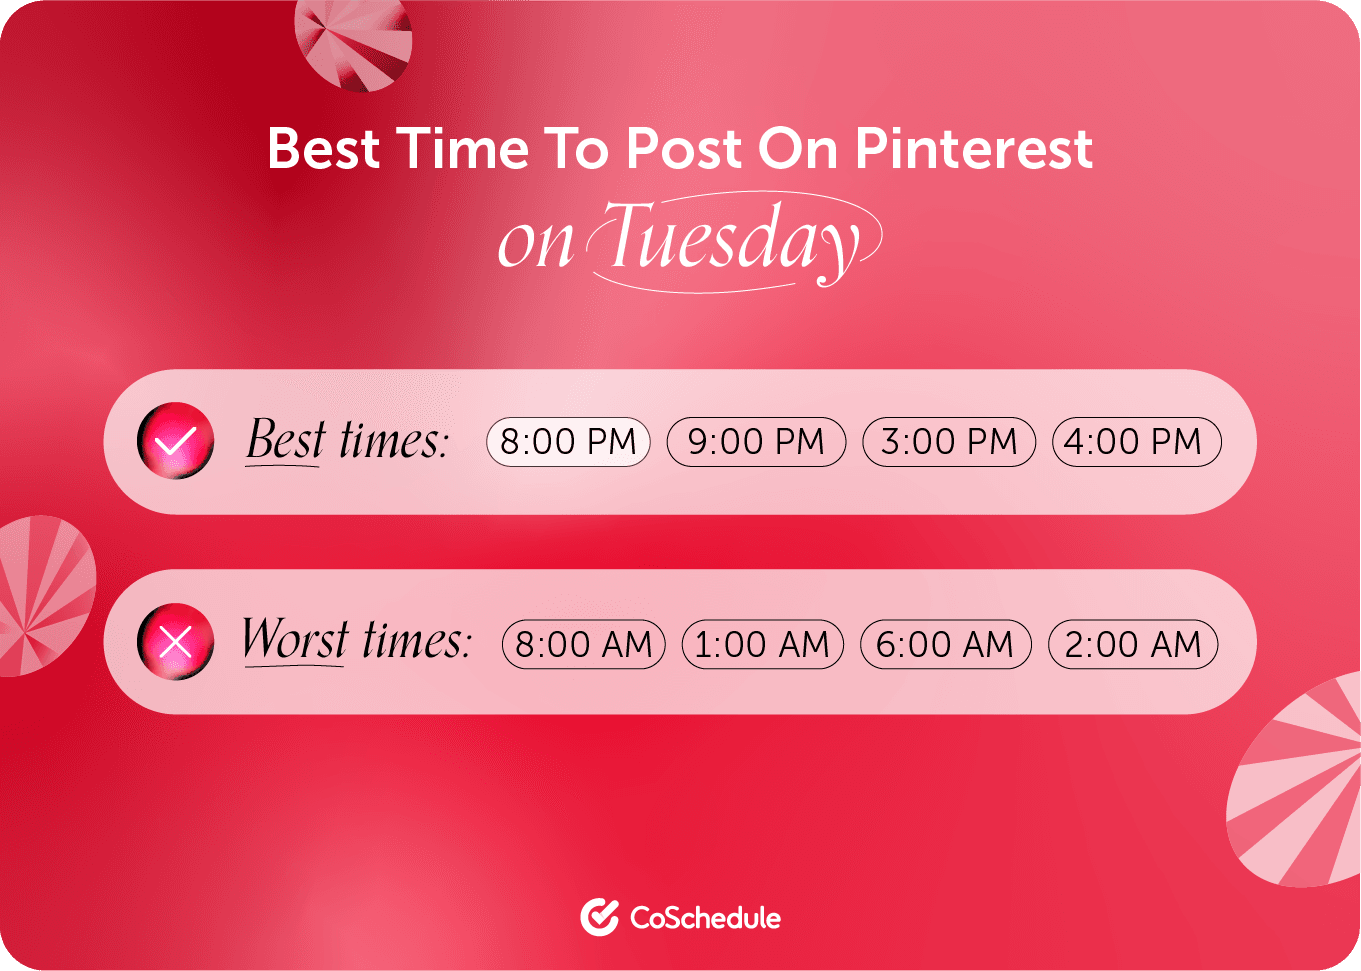 CoSchedule graphic on the best times to post on Pinterest Tuesday